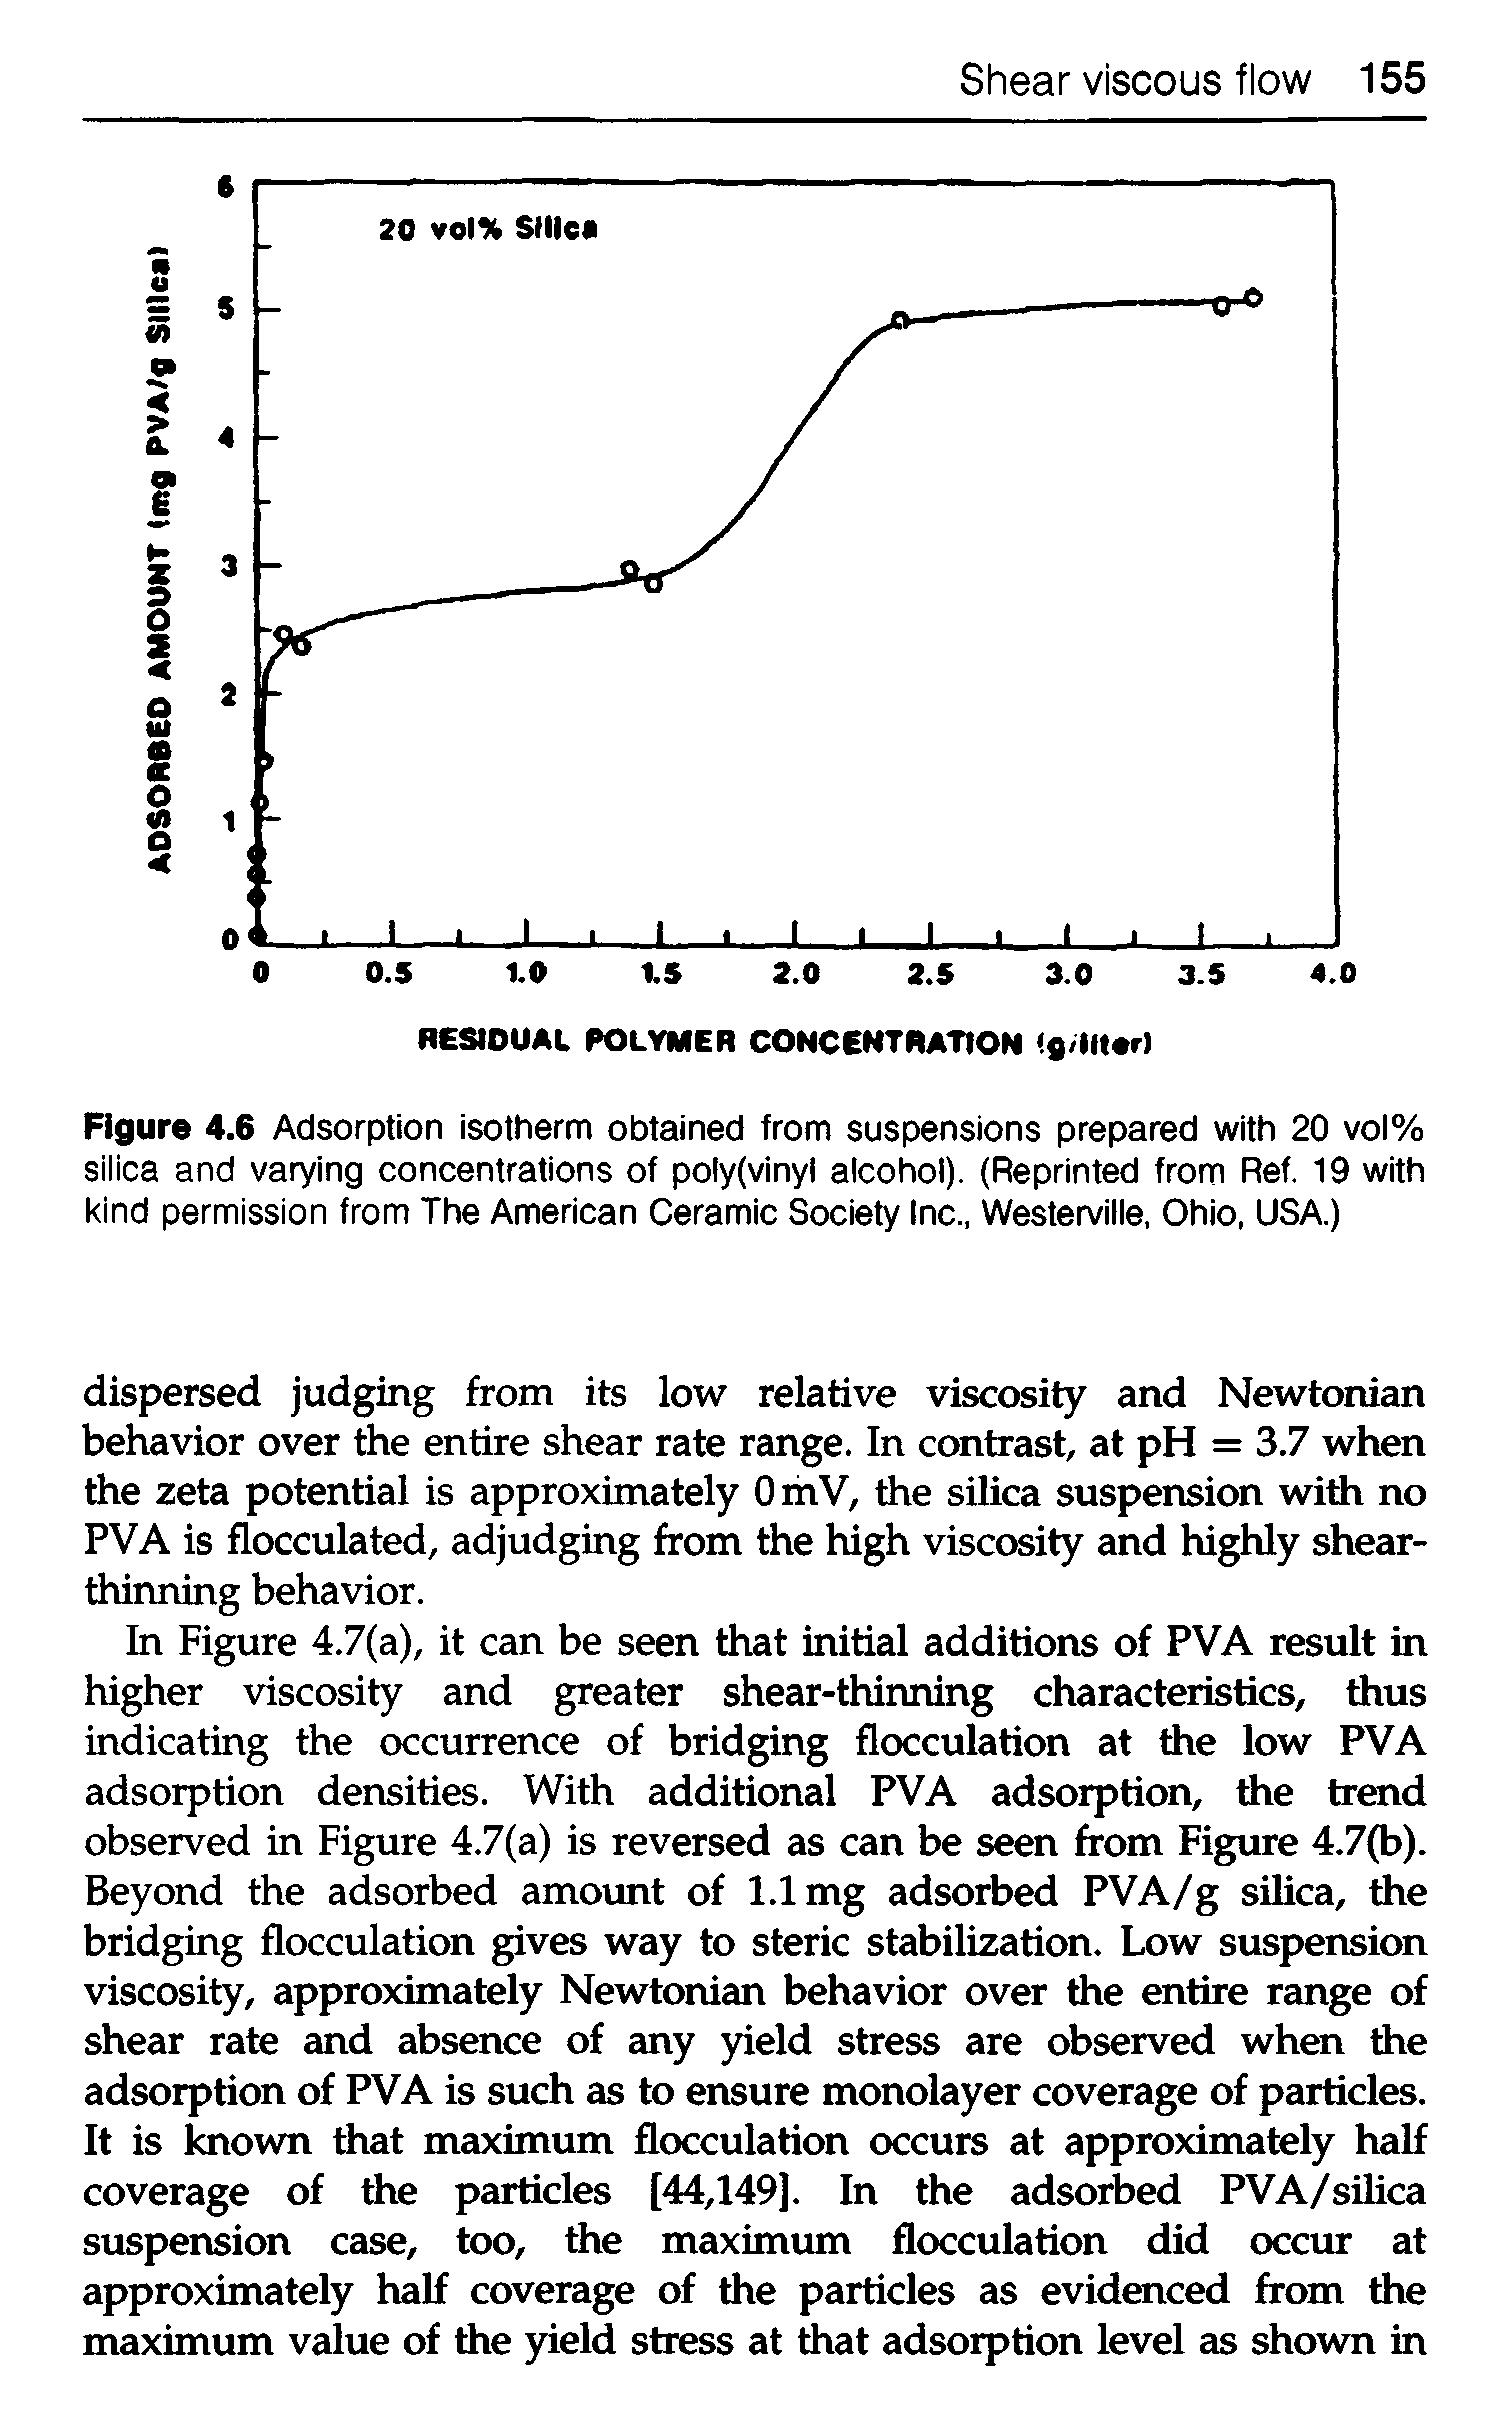 Figure 4.6 Adsorption isotherm obtained from suspensions prepared with 20 vol% silica and varying concentrations of poly(vinyl alcohol). (Reprinted from Ref. 19 with kind permission from The American Ceramic Society Inc., Westerville. Ohio, USA.)...